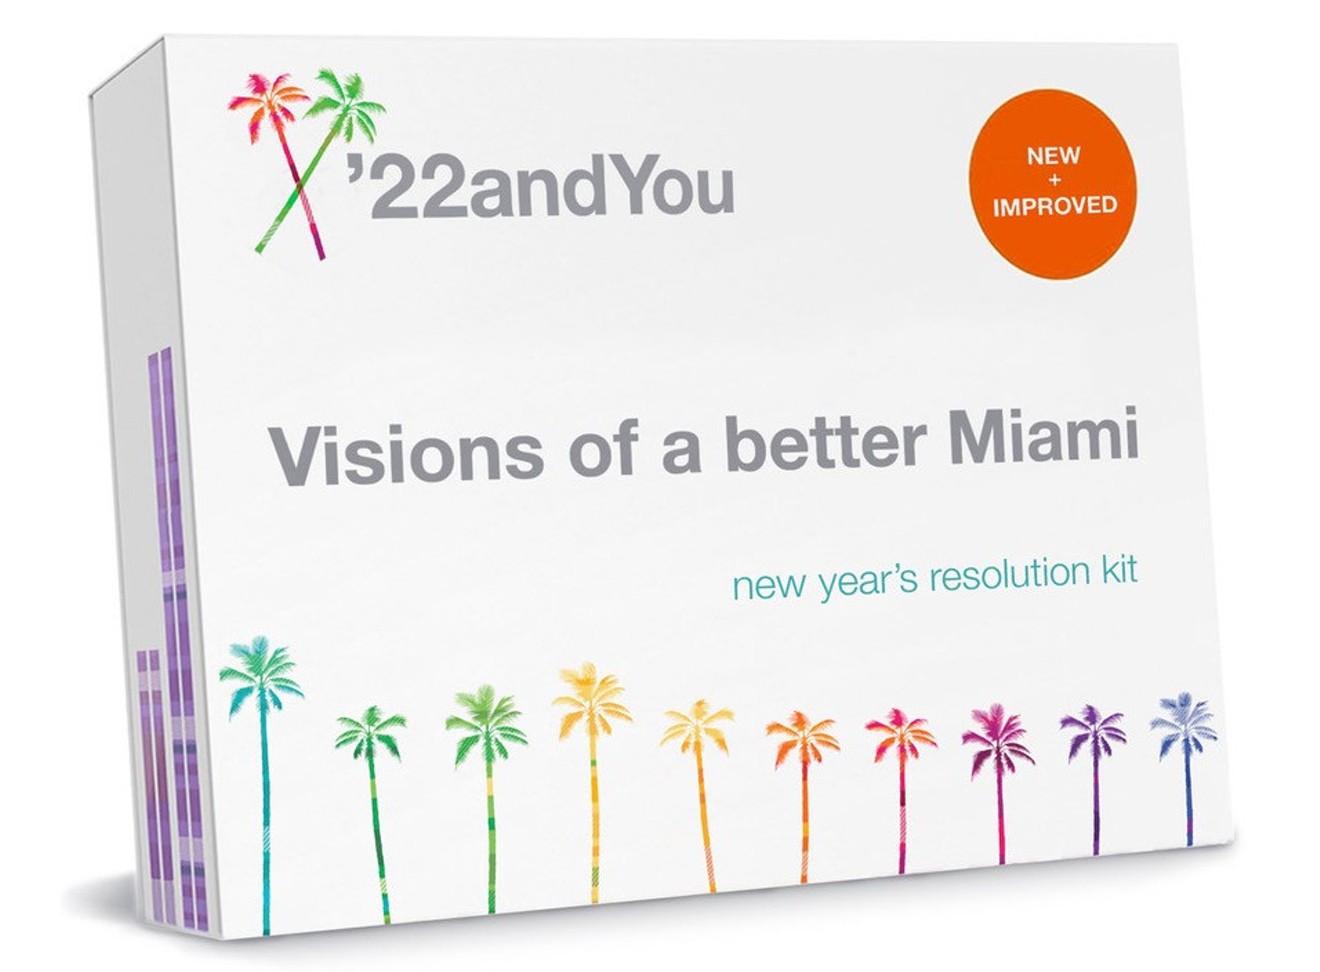 We asked a whole passel of locals to share a wish for Miamians in the new year.